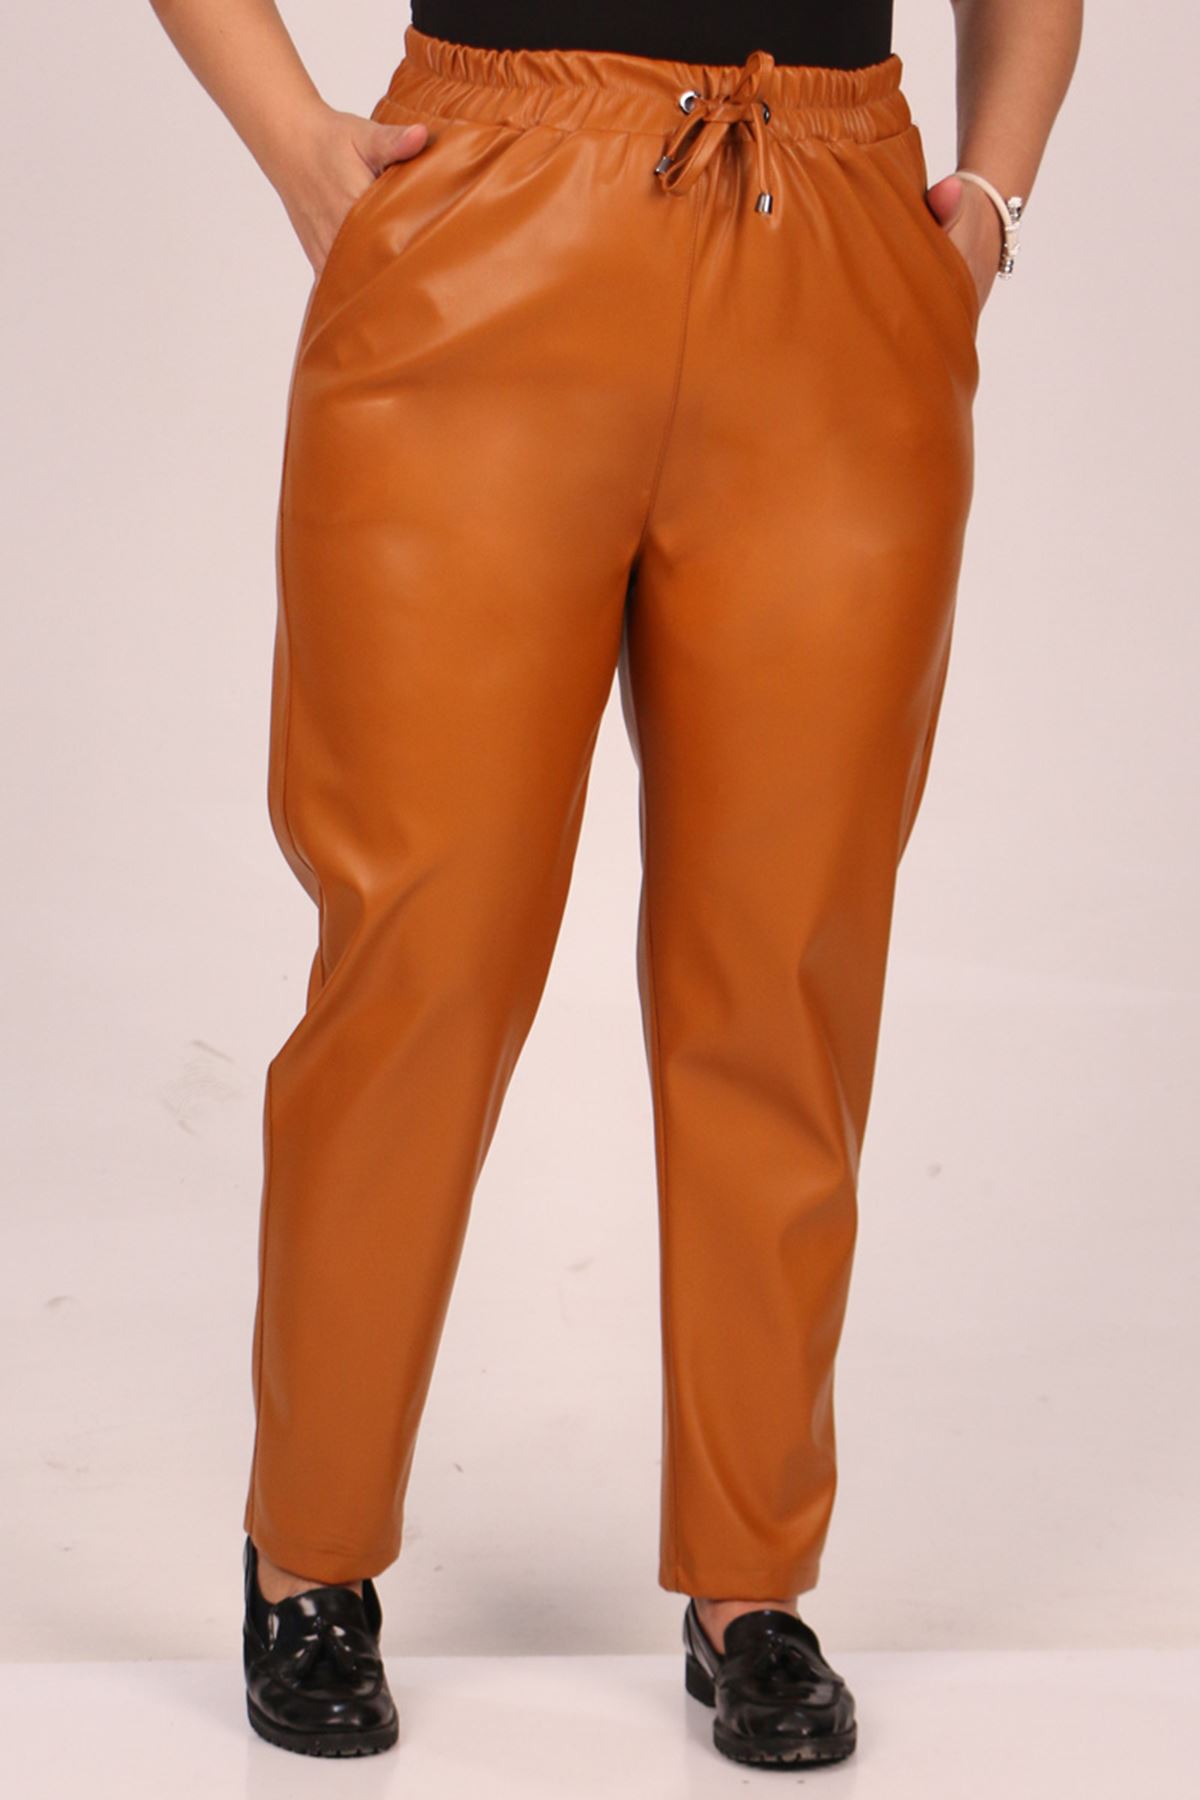 39039 Large Size Elastic Waist Leather Trousers-Tan